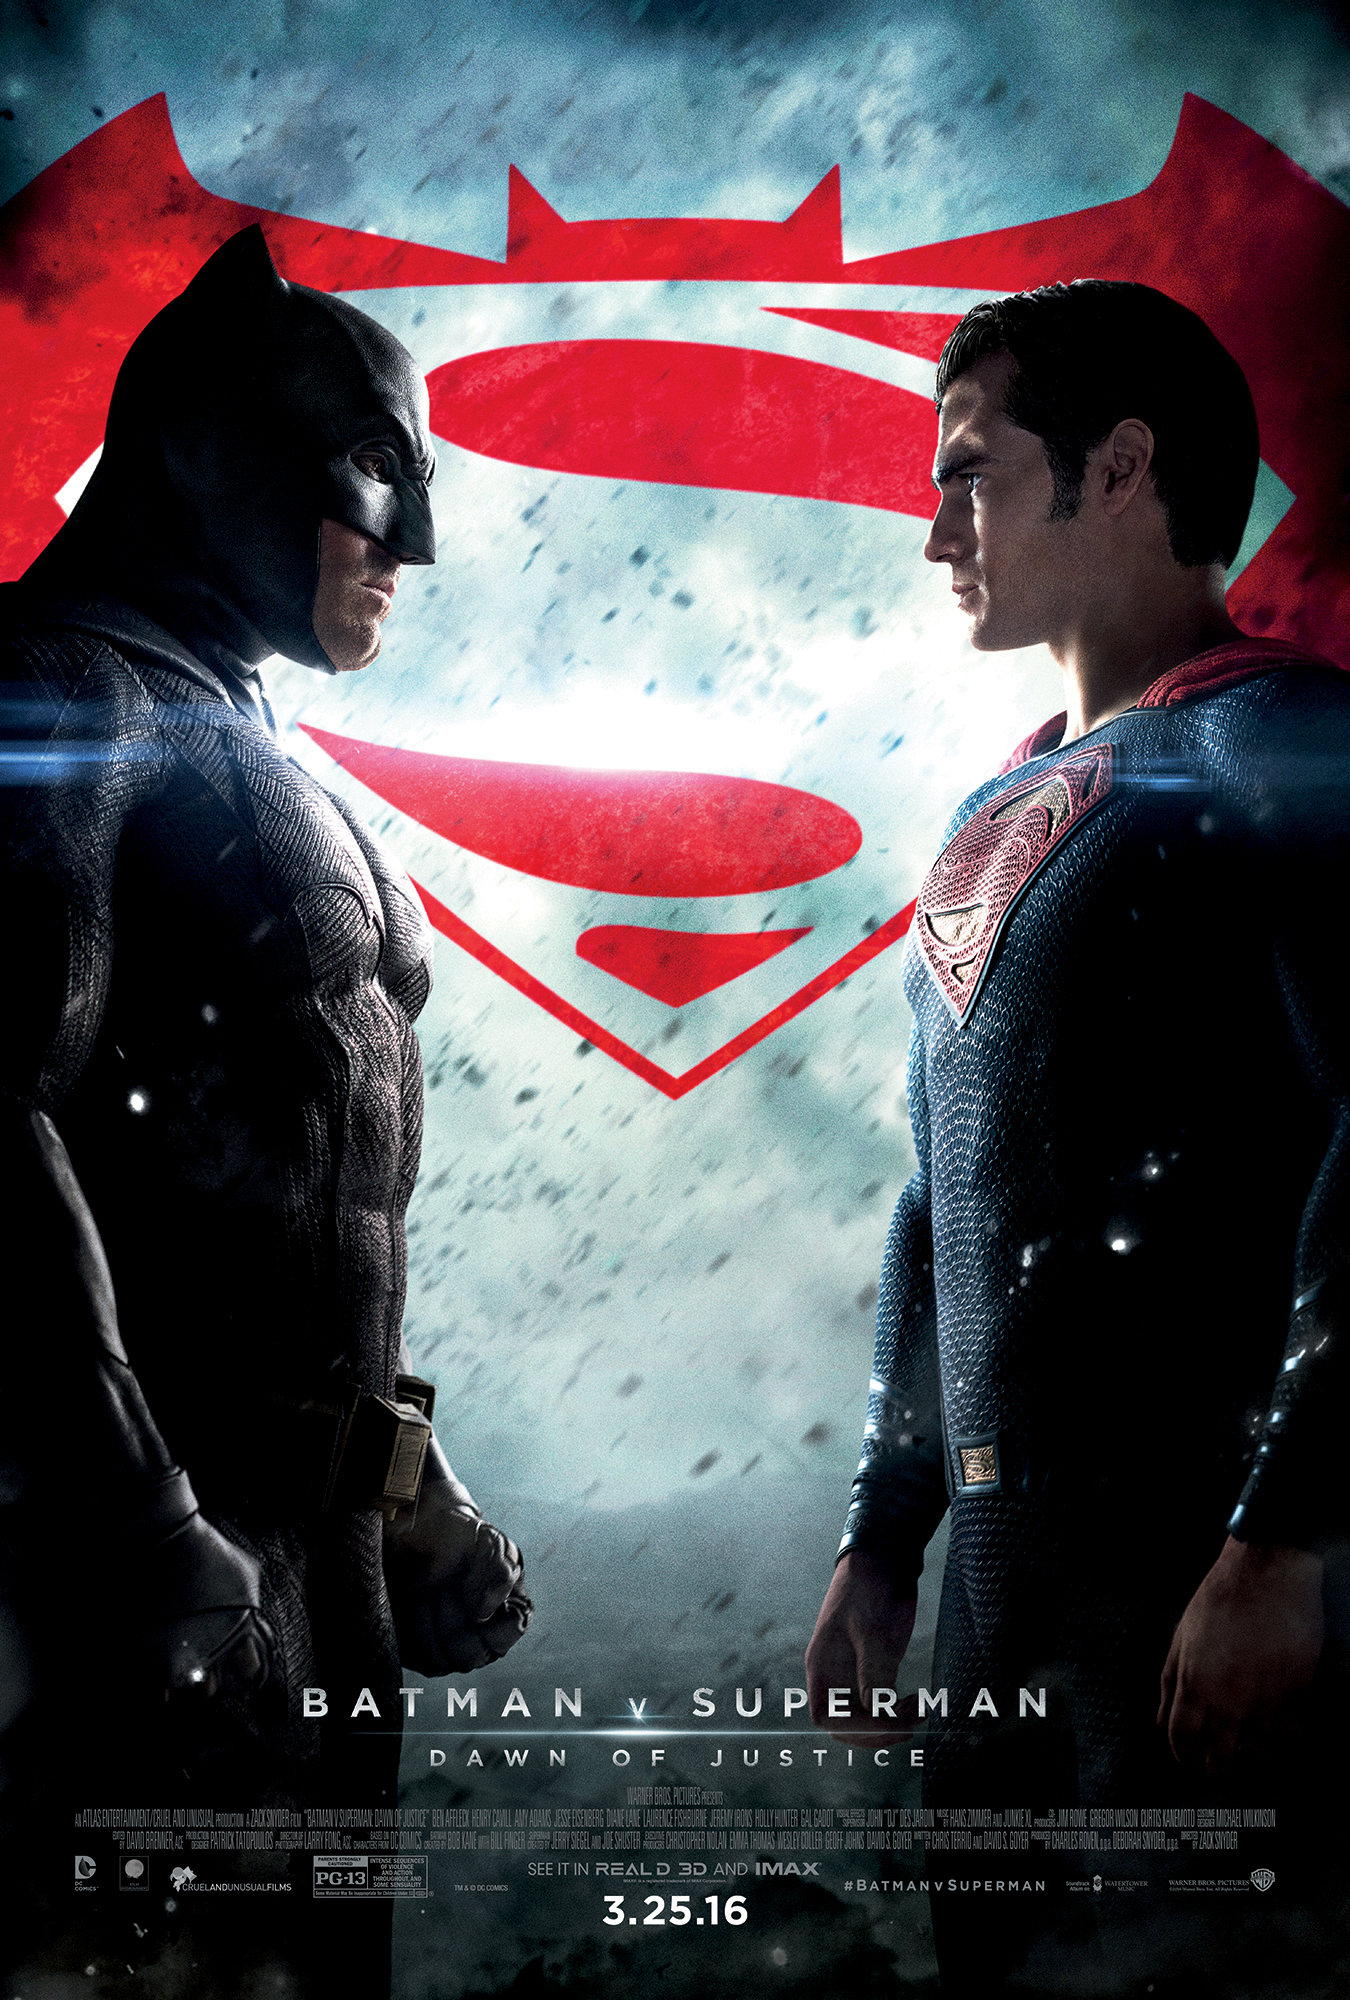 PHOTO: A promotion image for "Batman v Superman" is seen here.